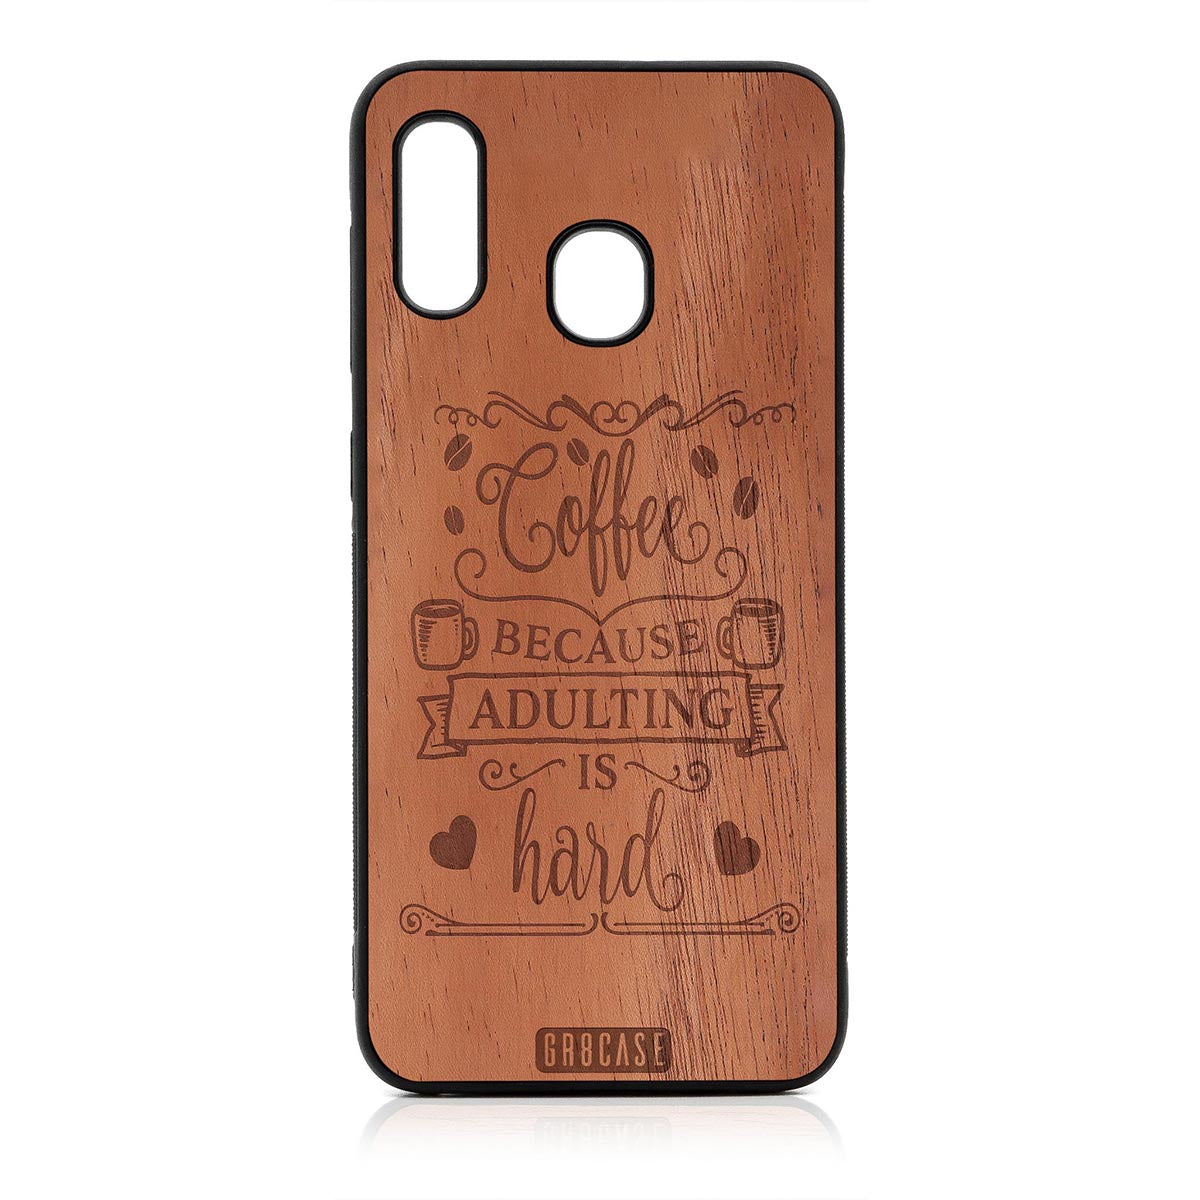 Coffee Because Adulting Is Hard Design Wood Case For Samsung Galaxy A20 by GR8CASE